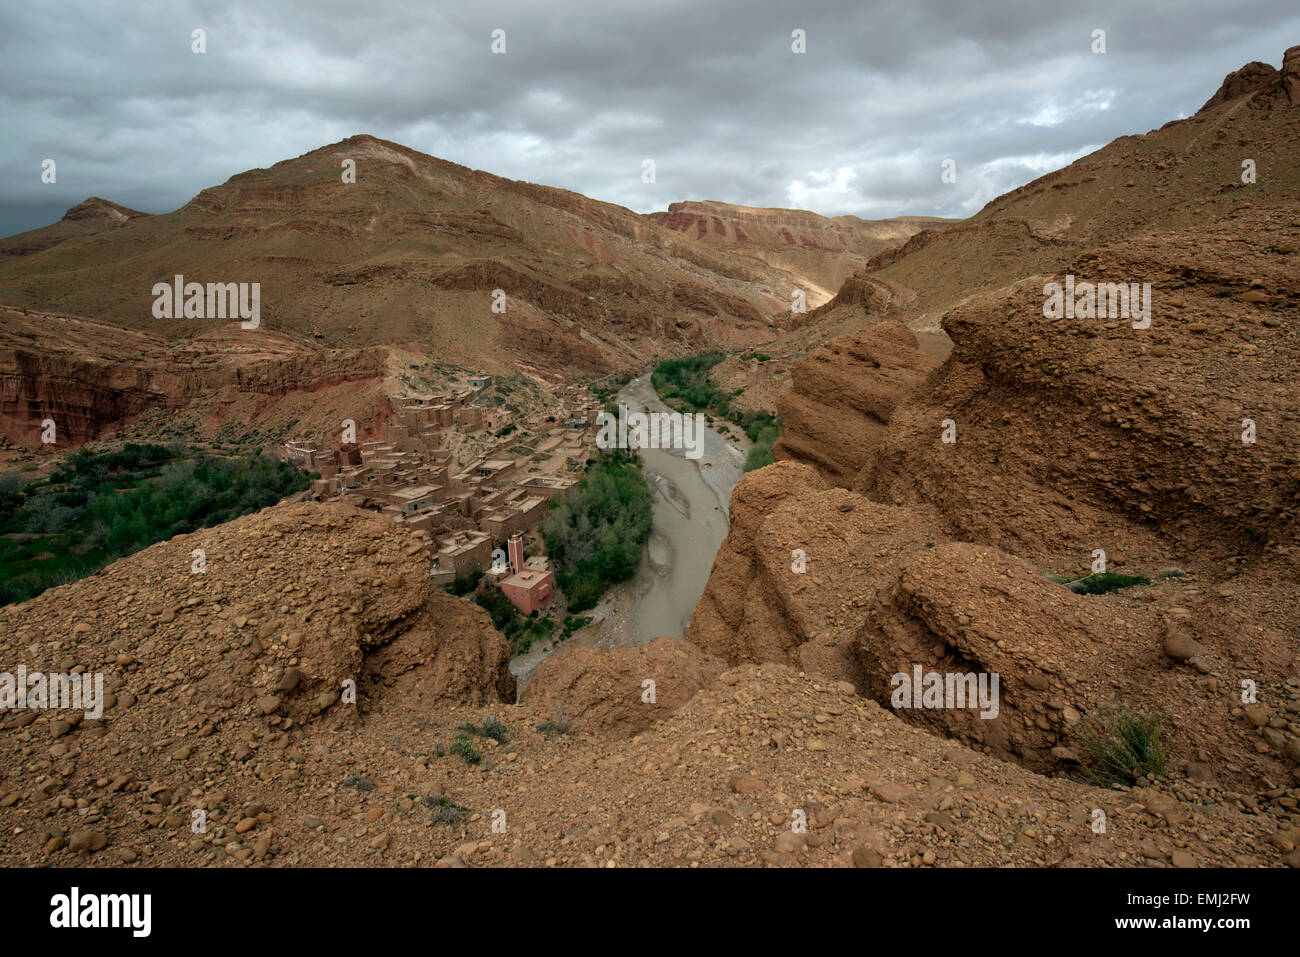 Overview of Kelaa M'Gouna, on Dades River.  Conglomerate, classic sedimentary rock, in High Atlas Mountains, Morocco.  Ourzazate Stock Photo